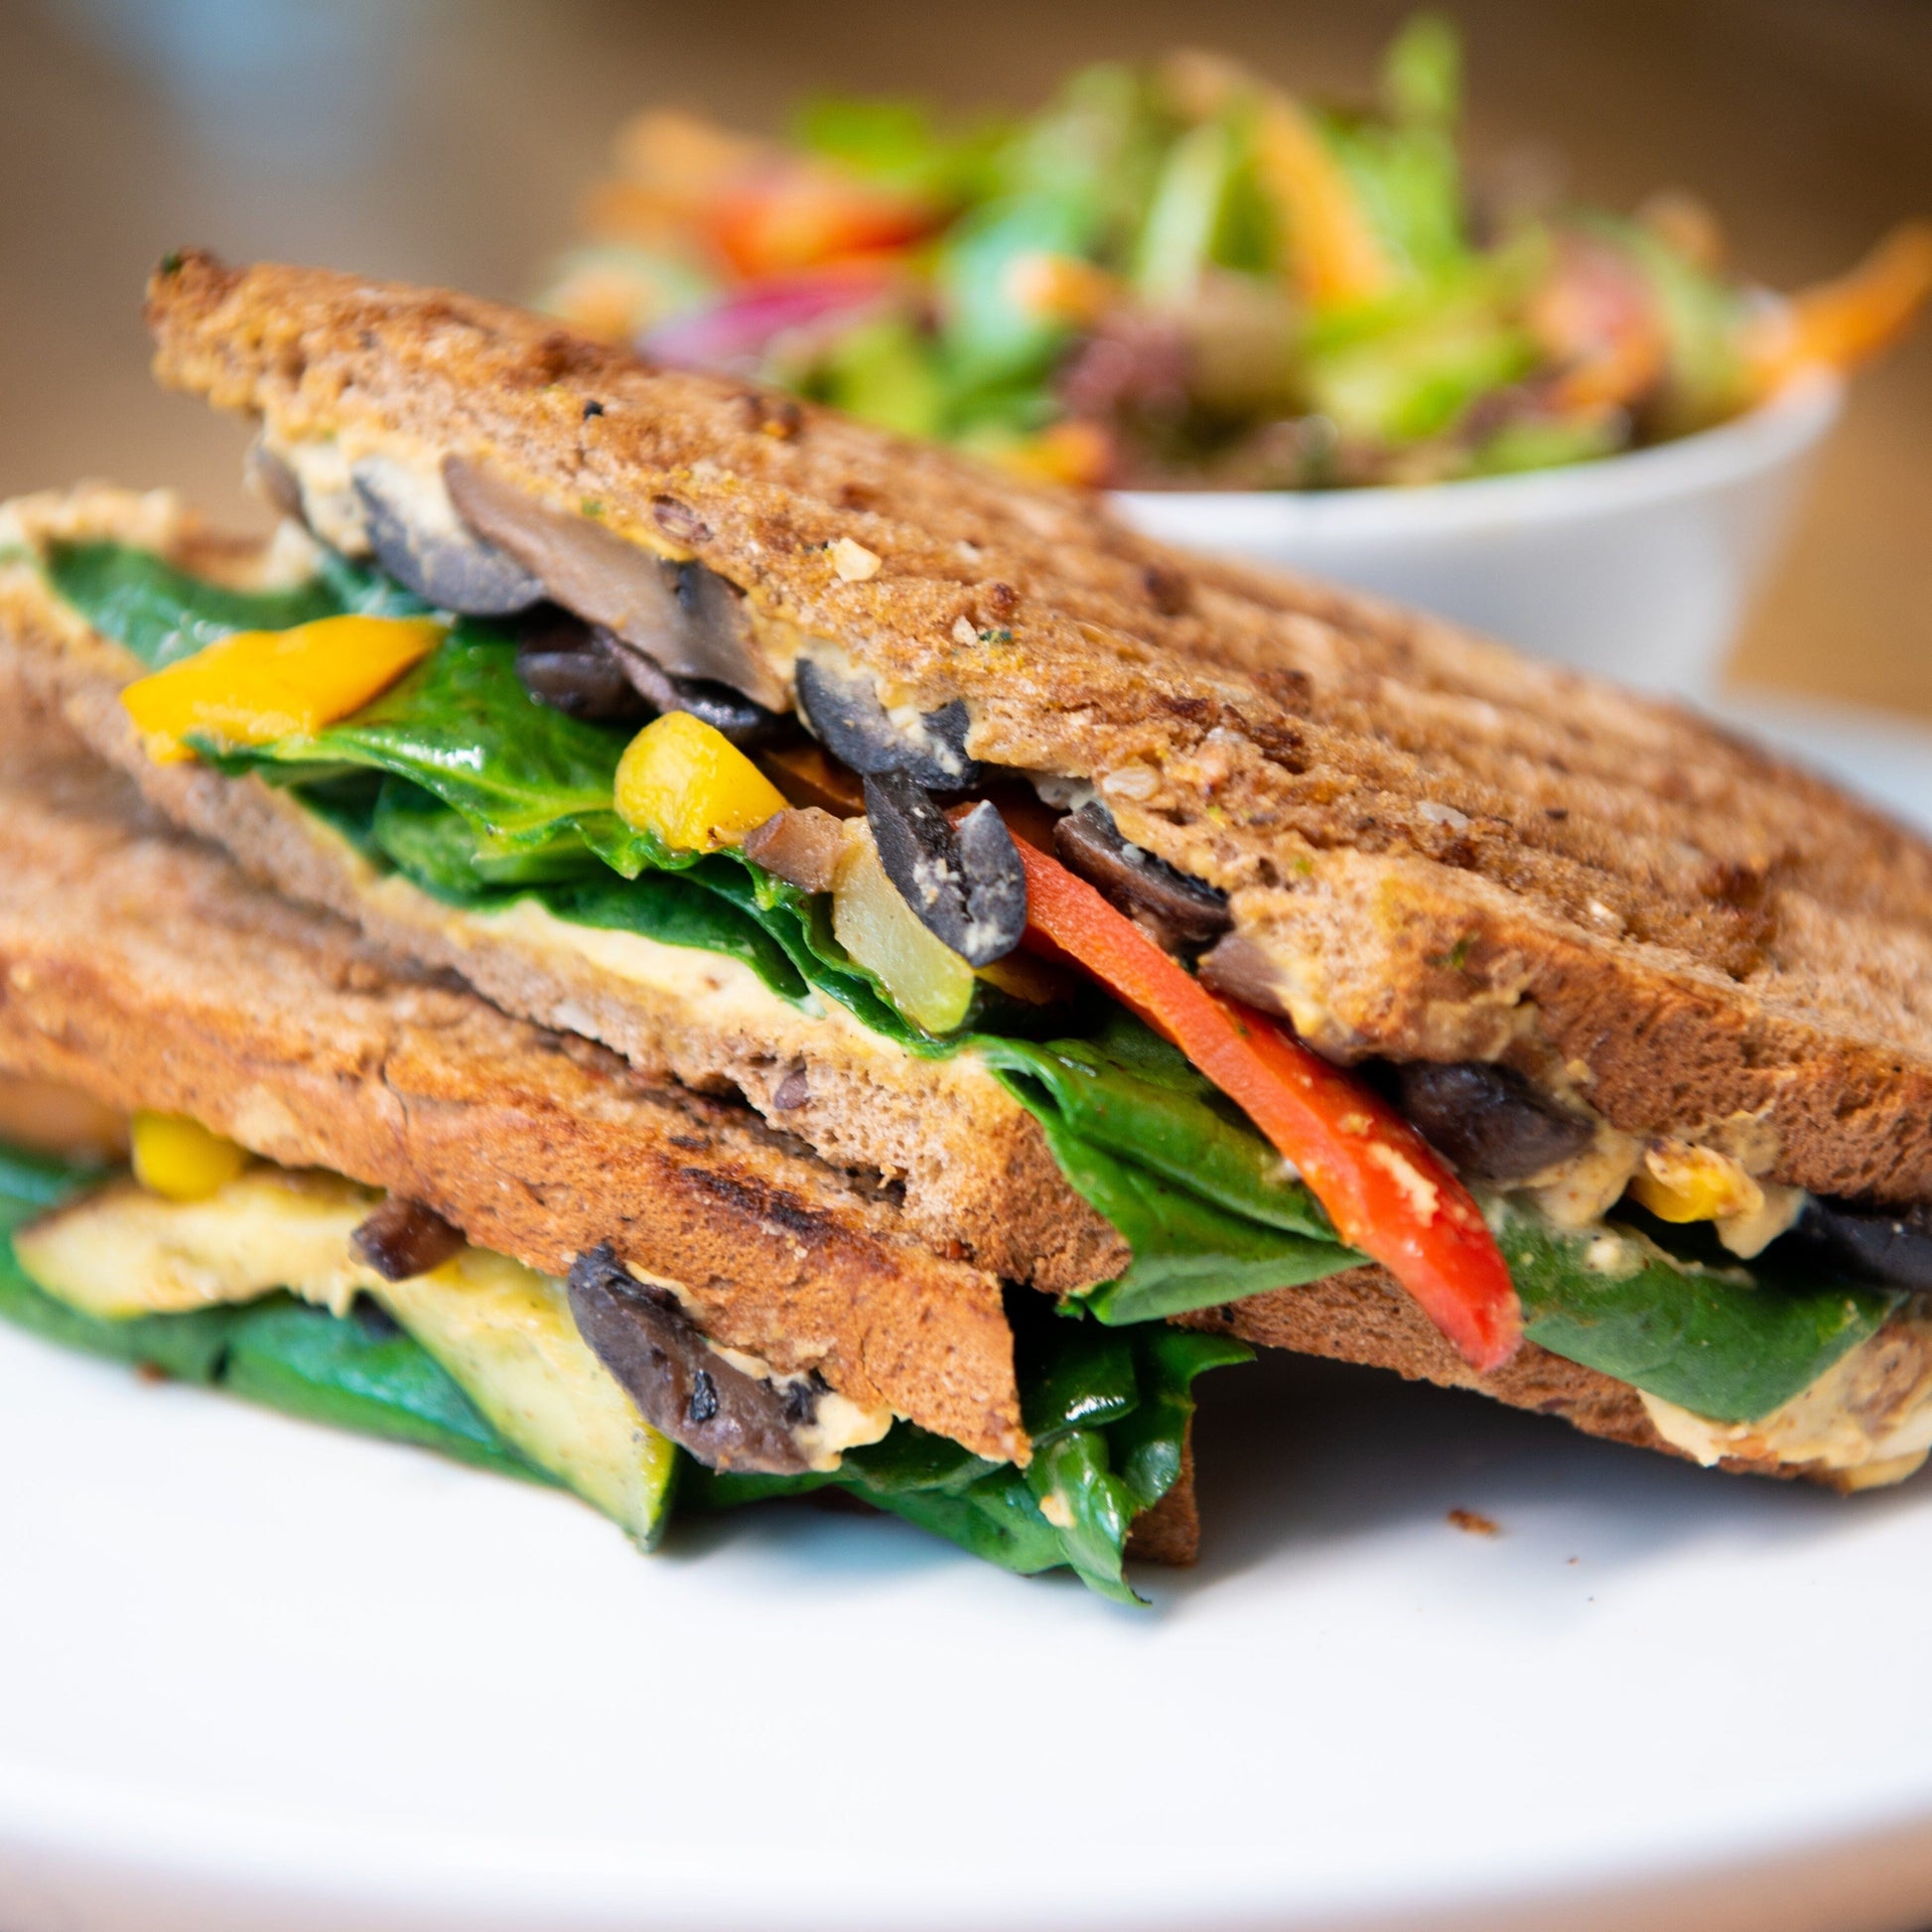 Grilled Vegetable Sandwich at Zucchini